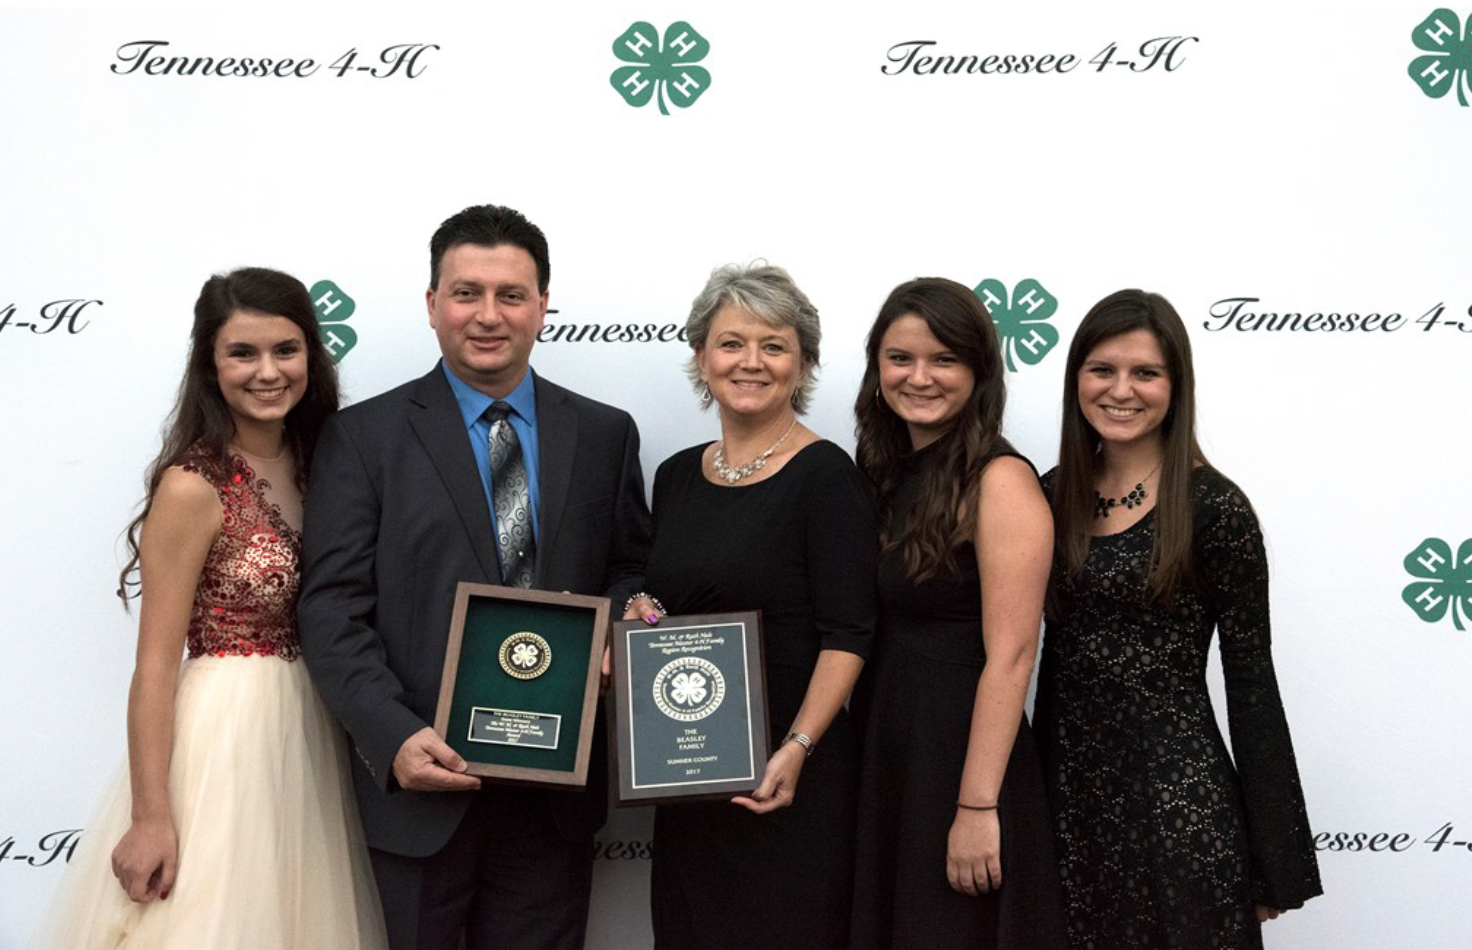 Hale Master 4-H Families Recognized - Standing from left to right, Kassidy, Craig Beasley, Missy Beasley, Kirsten, and Kayleigh